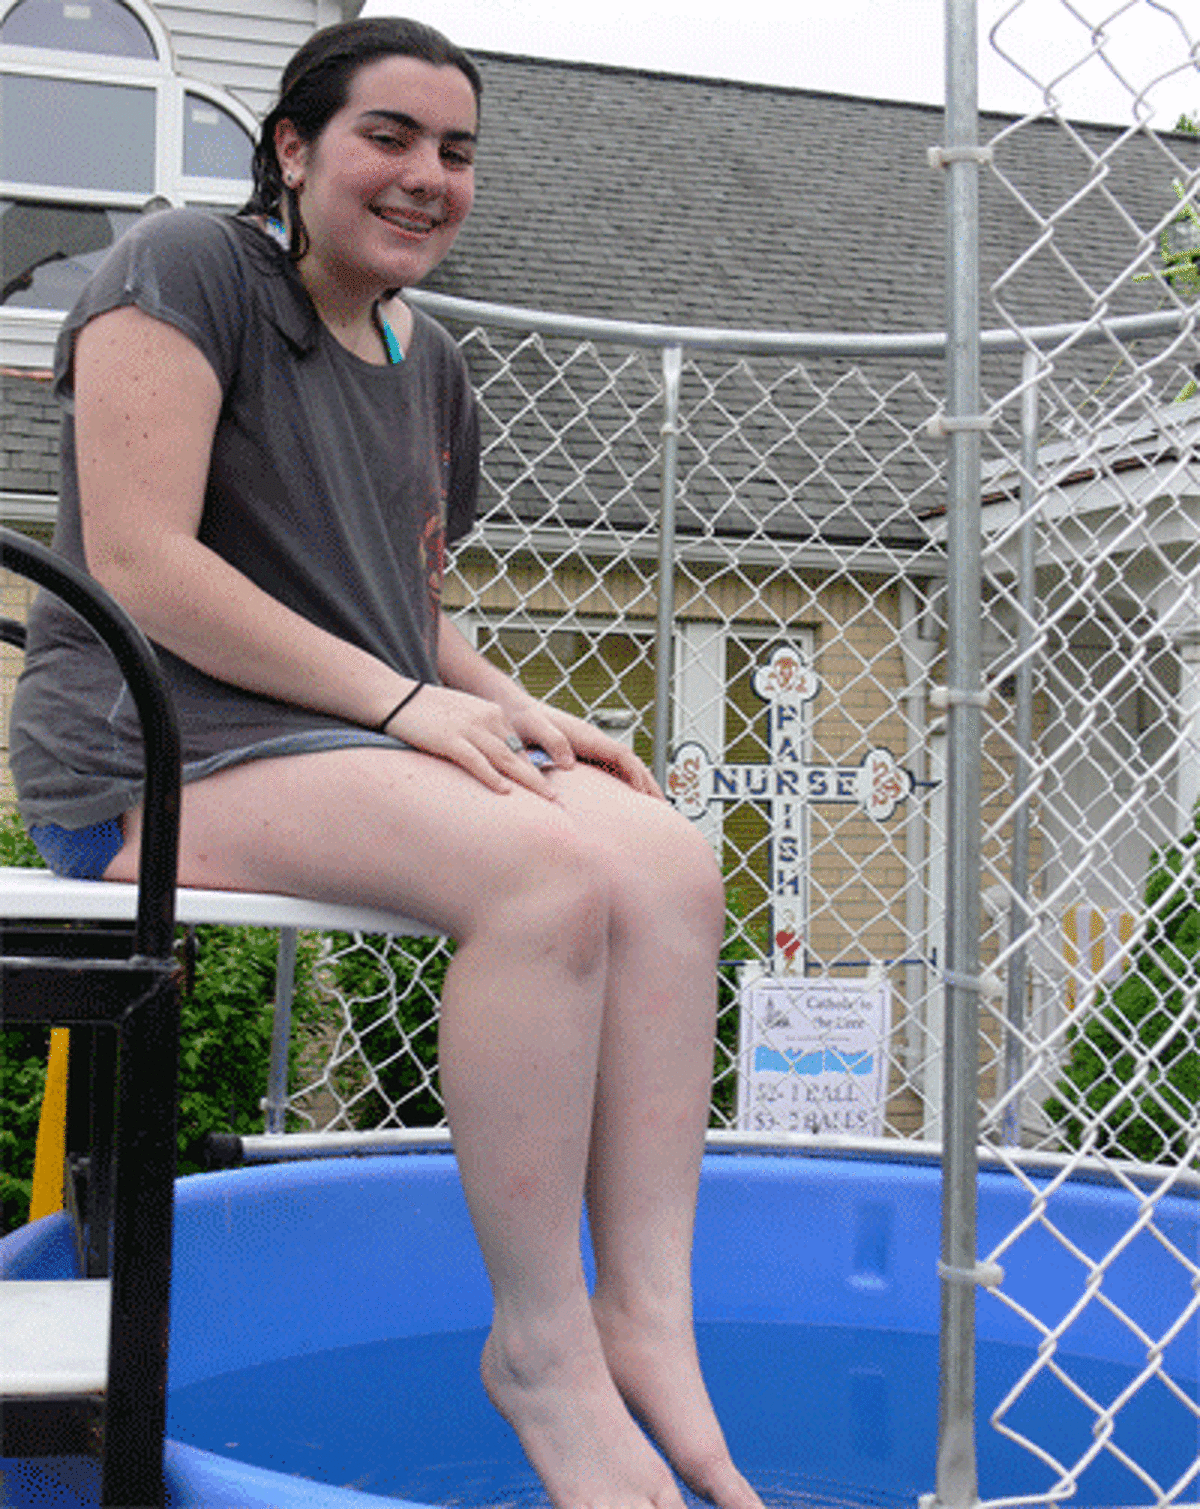 Olivia Mantero, 14, of Shelton doesn’t mind getting wet in the dunk pool at the St. Joseph Carnival and Food Fest because she’s helping to raise money for the Catholic school that she attends. “It’s worth it, especially when you see the kids smiling after they put me in,” Olivia said.